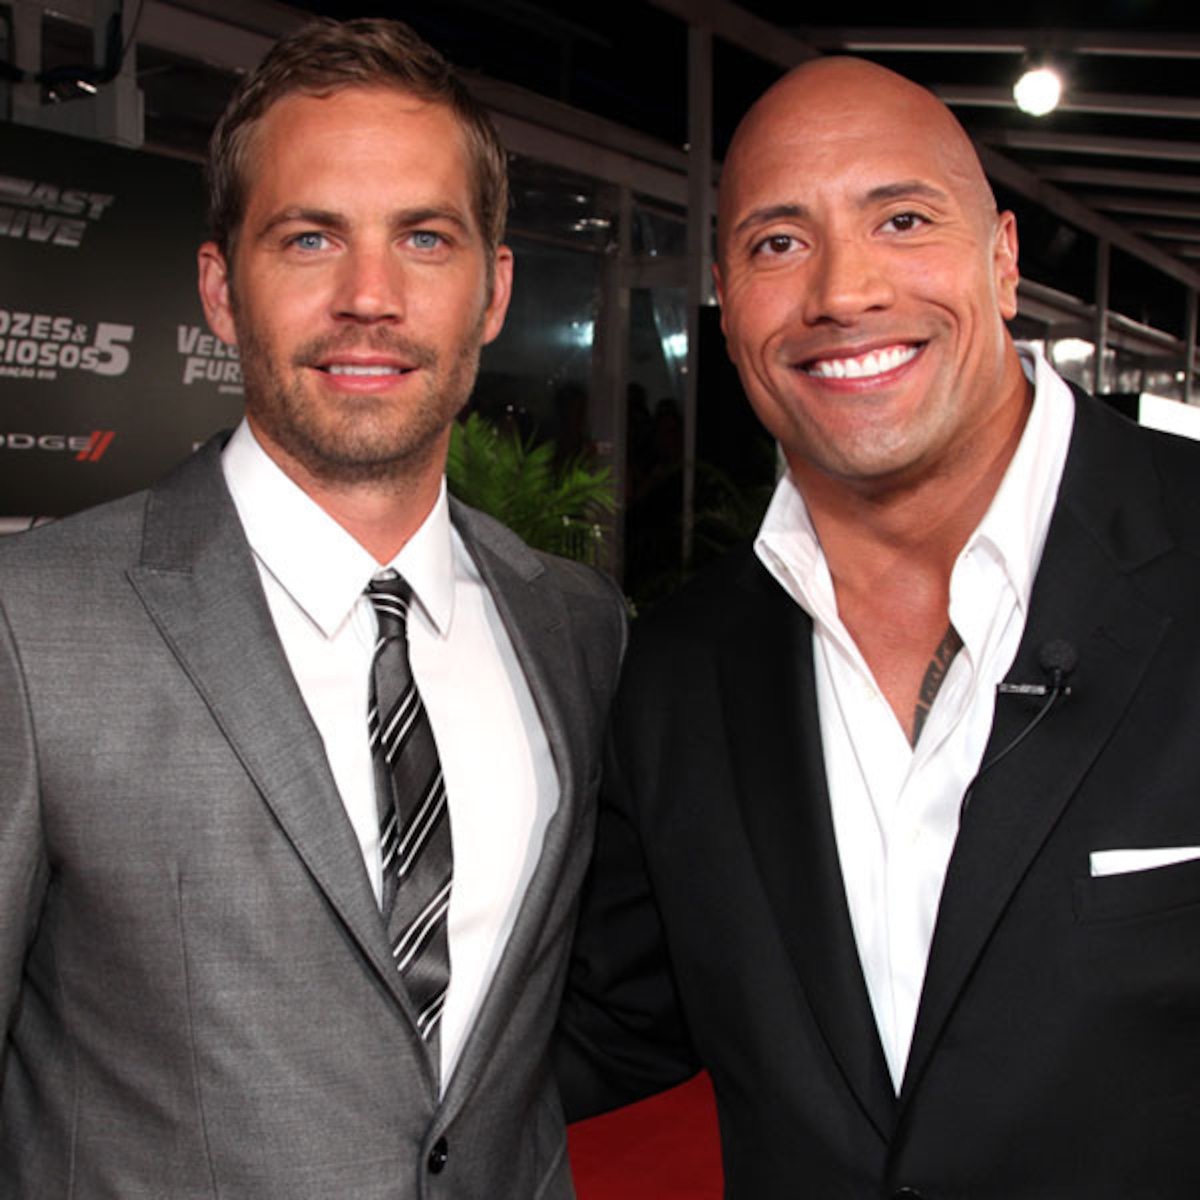 Stereotype Verval Mus The Rock Remembers Paul Walker - E! Online